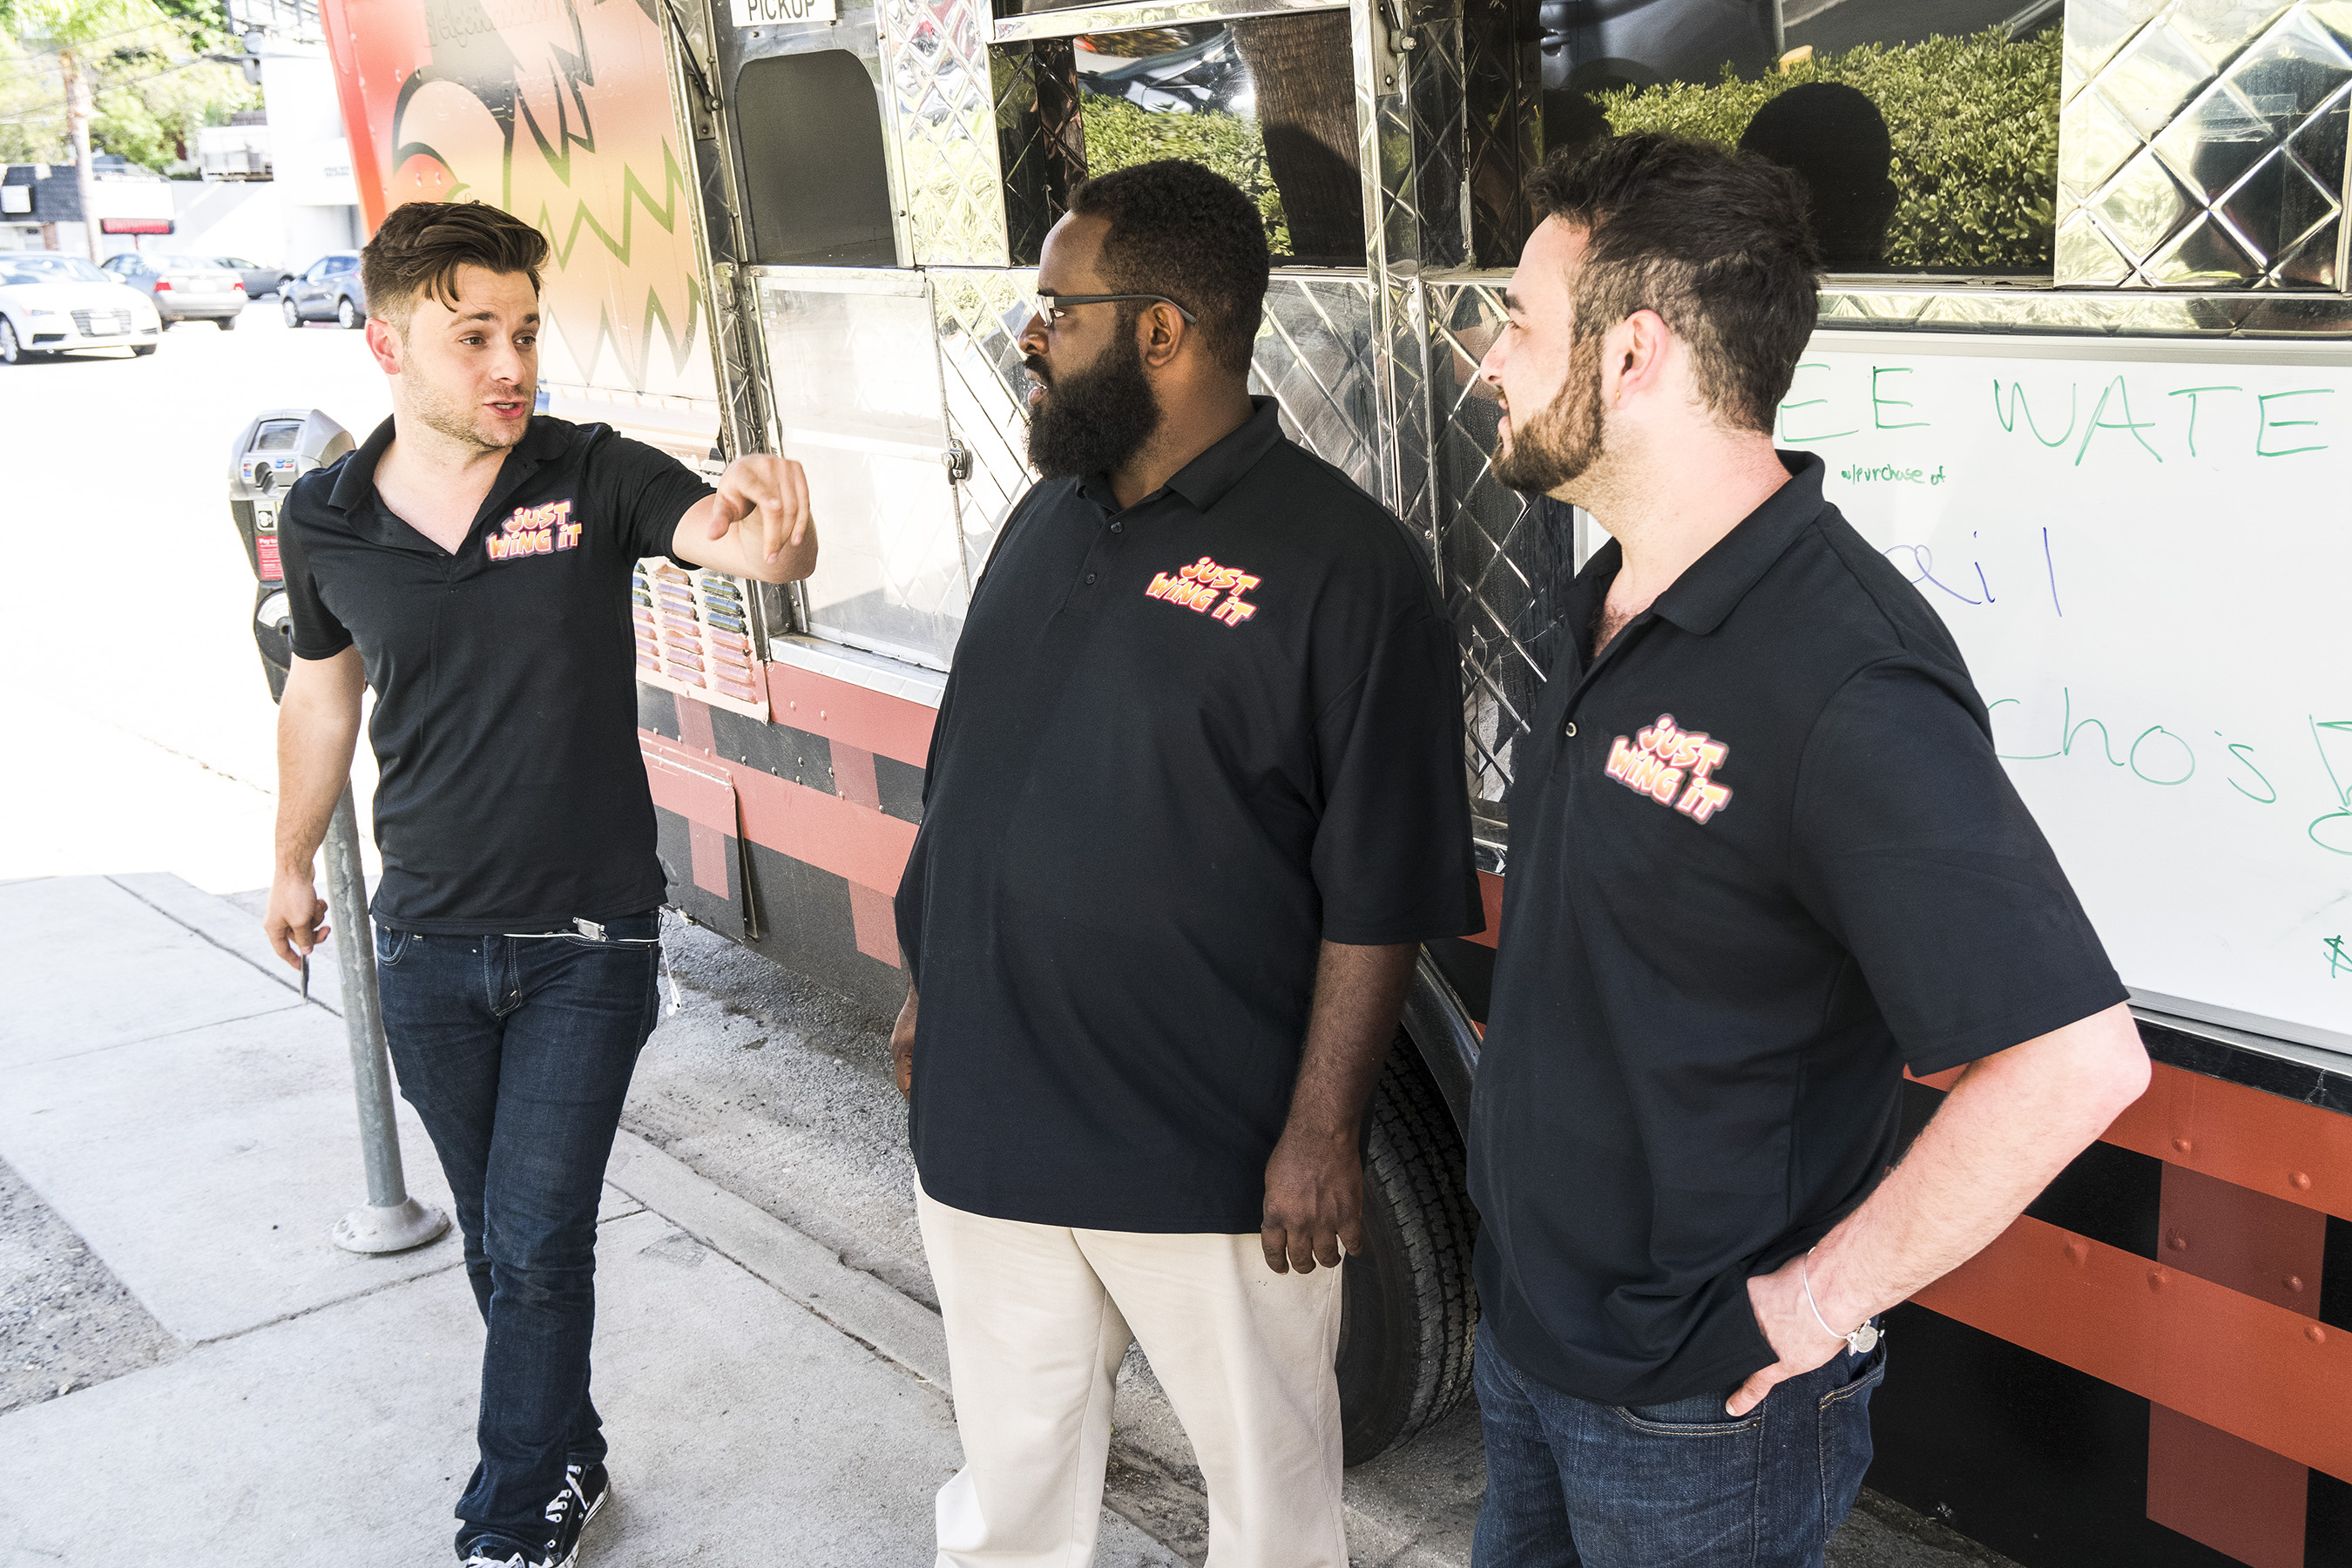 Team Just Wing It competing on Food Network's The Great Food Truck Race